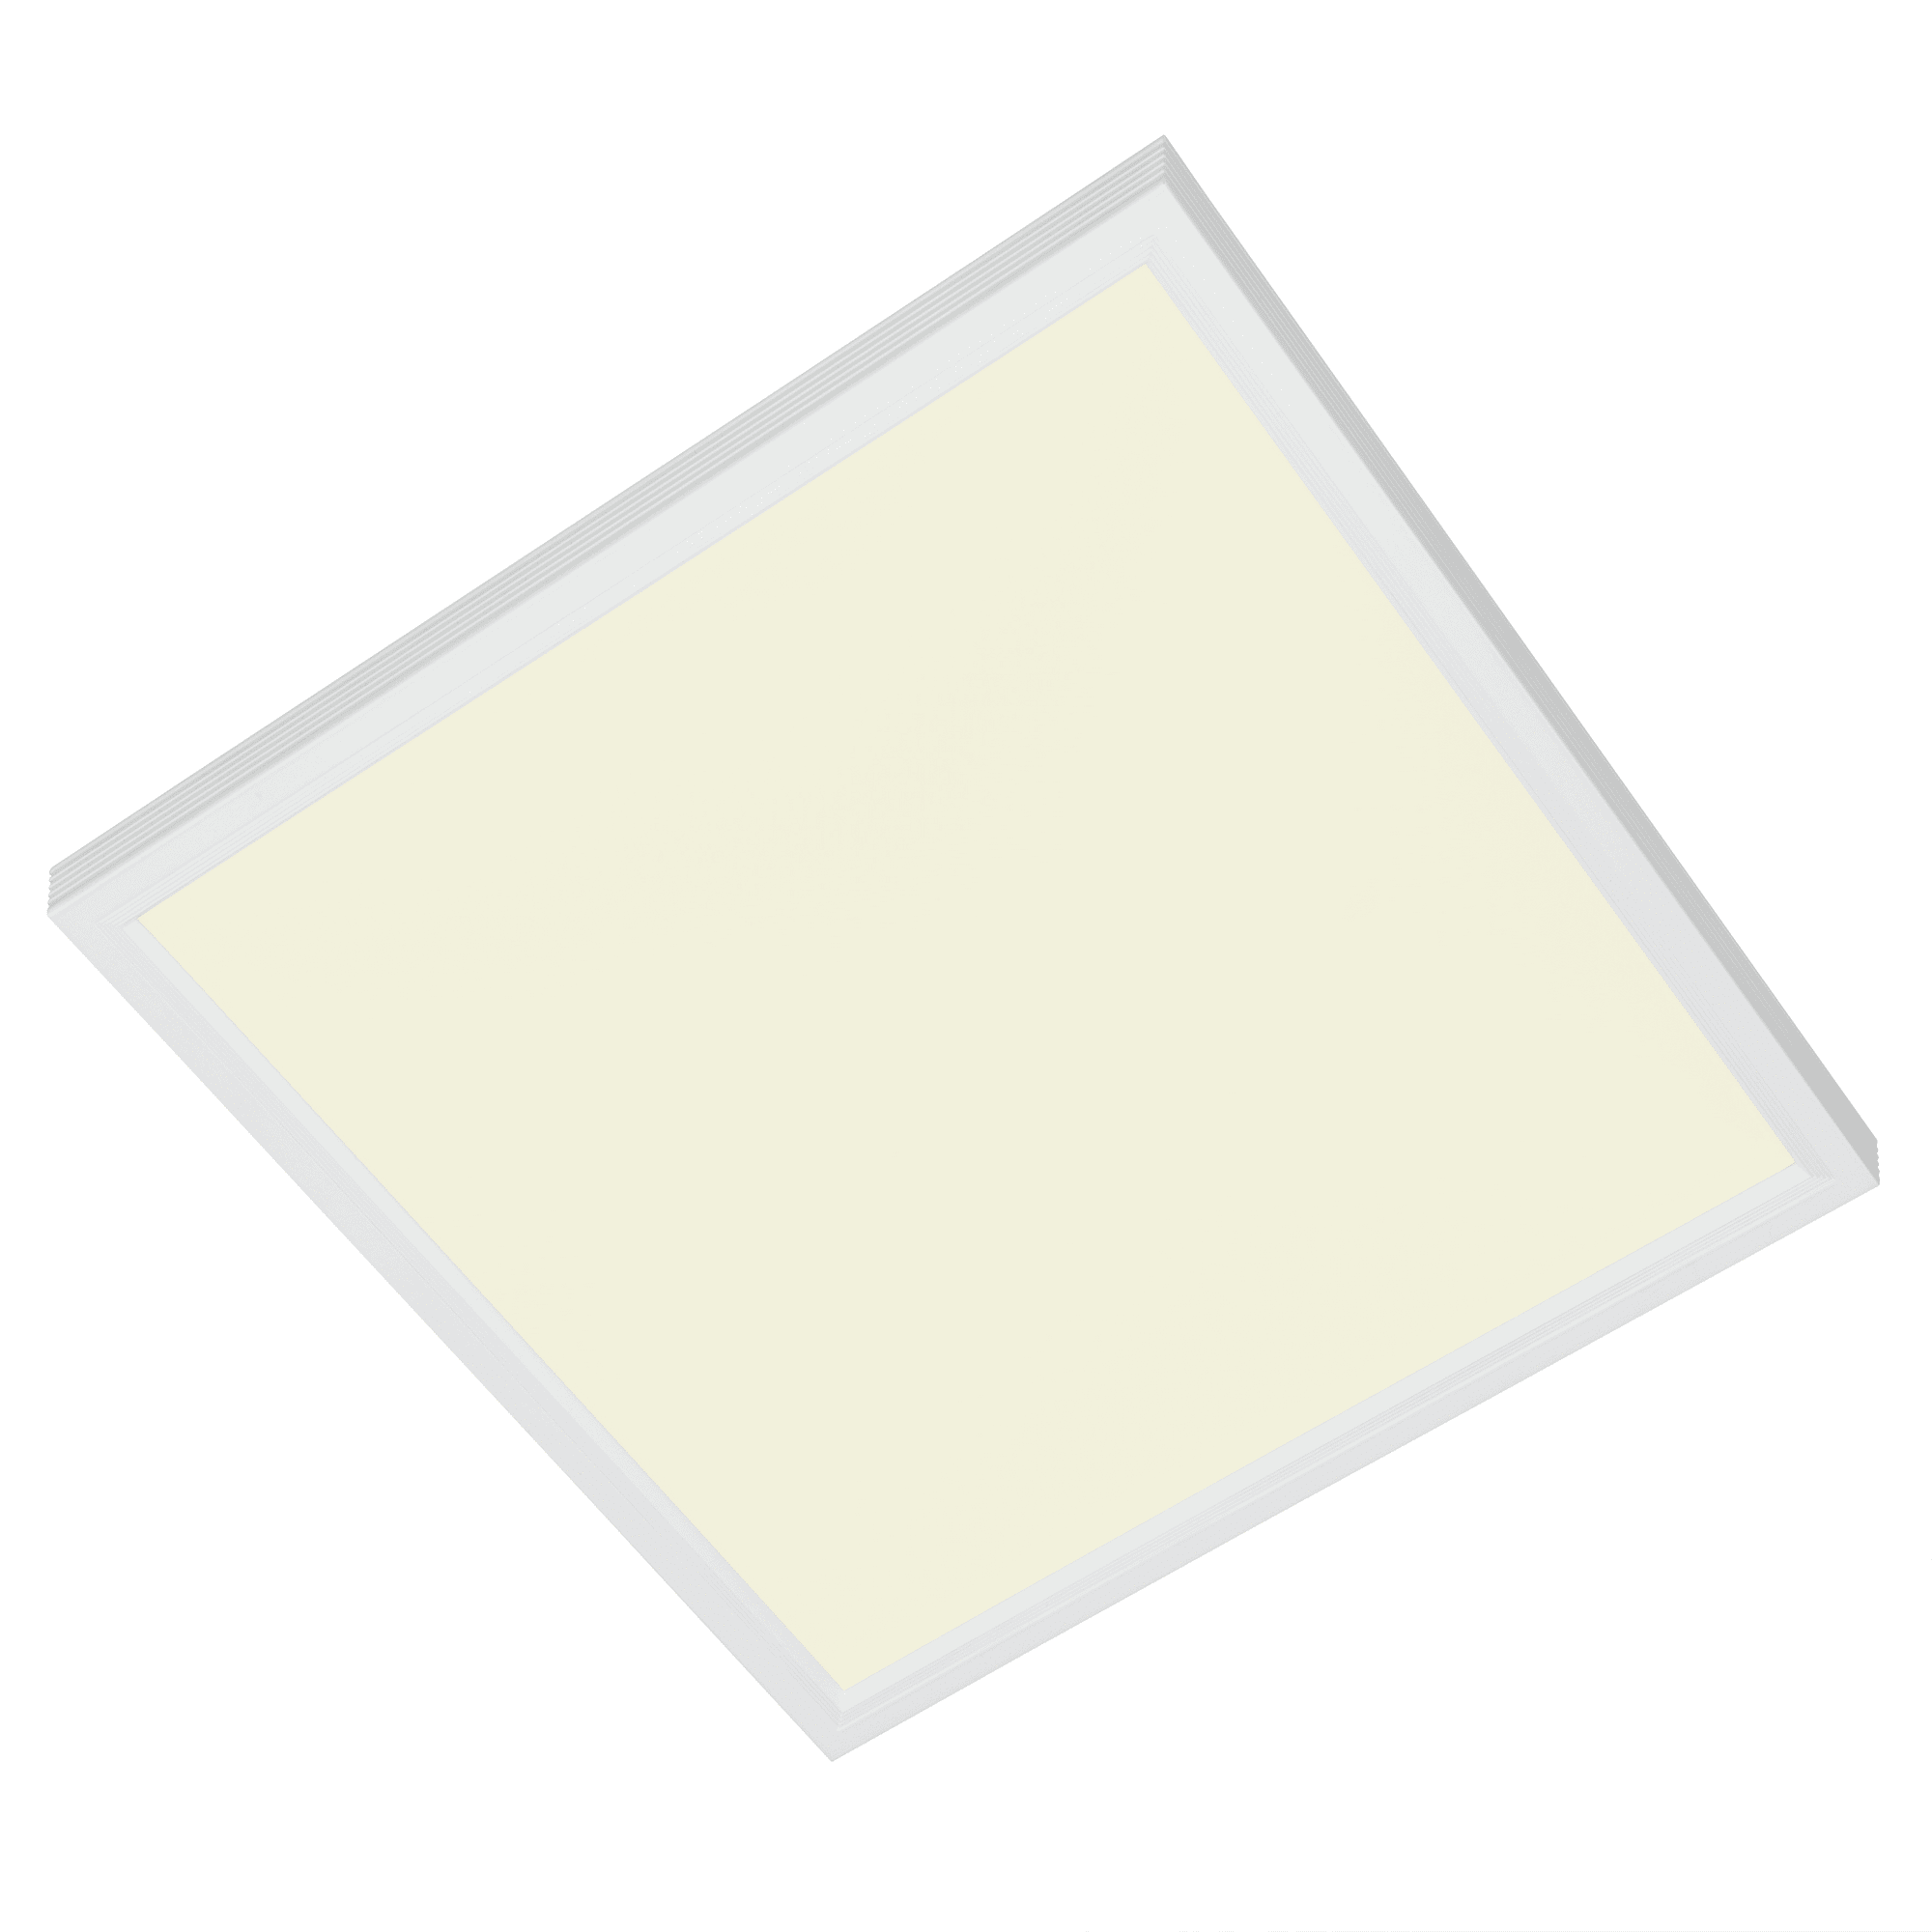 Deckenleuchte 'LED Panel' 45 x 45 x 5,4 cm farbwechselnd + product picture